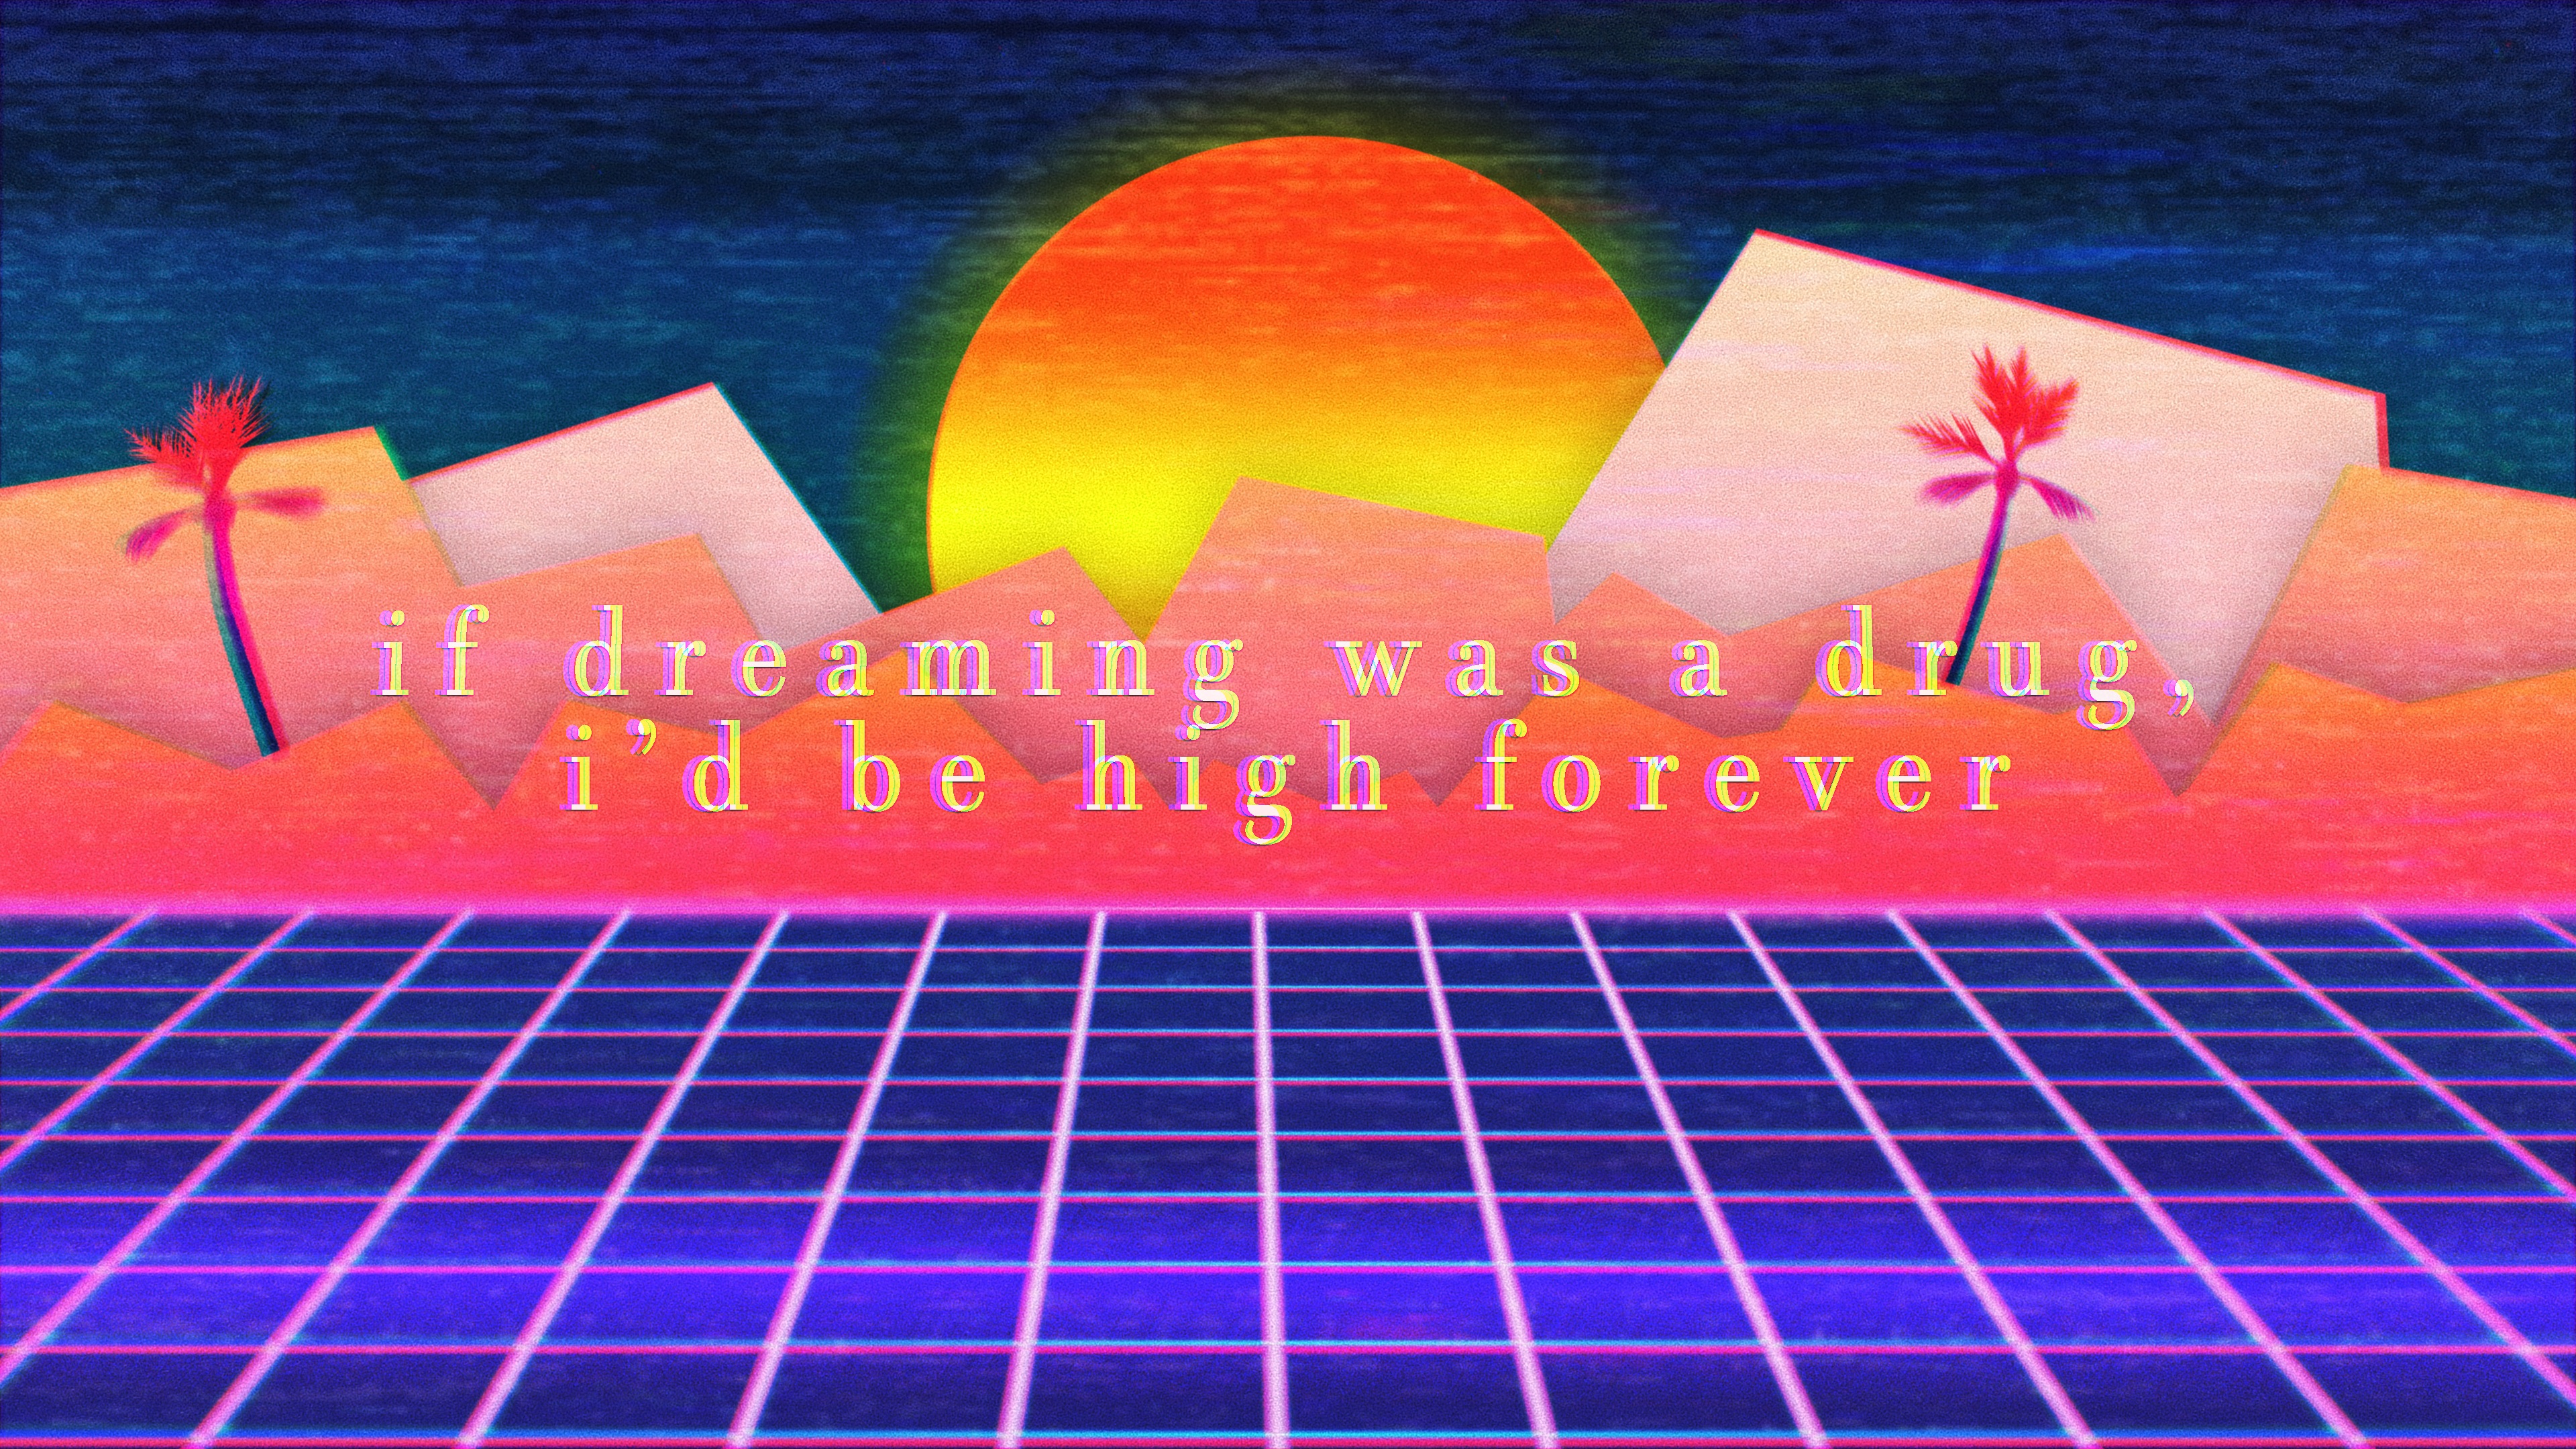 General 3840x2160 OutRun sunset vaporwave retrowave text quote video games grid